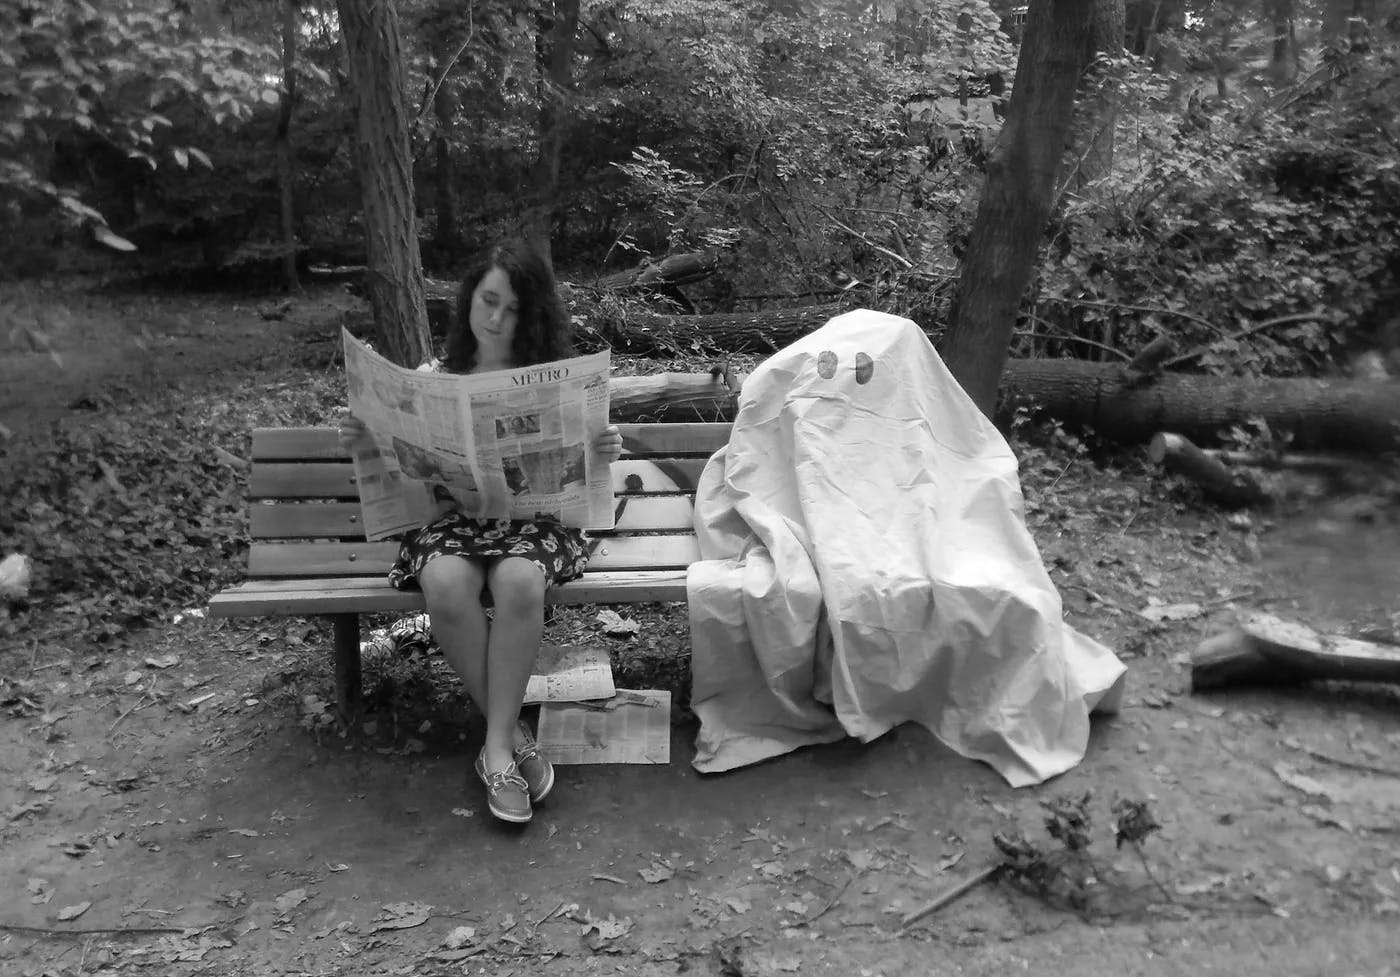 A picture of me in high school reading a newspaper next to a deflated sheet ghost. Unable to have anyone pose underneath the sheet with only two people and no tripod, we filled the ghost with sticks and branches found in the park around us. It didn’t really work, but we still got a laugh out of this photoshoot.